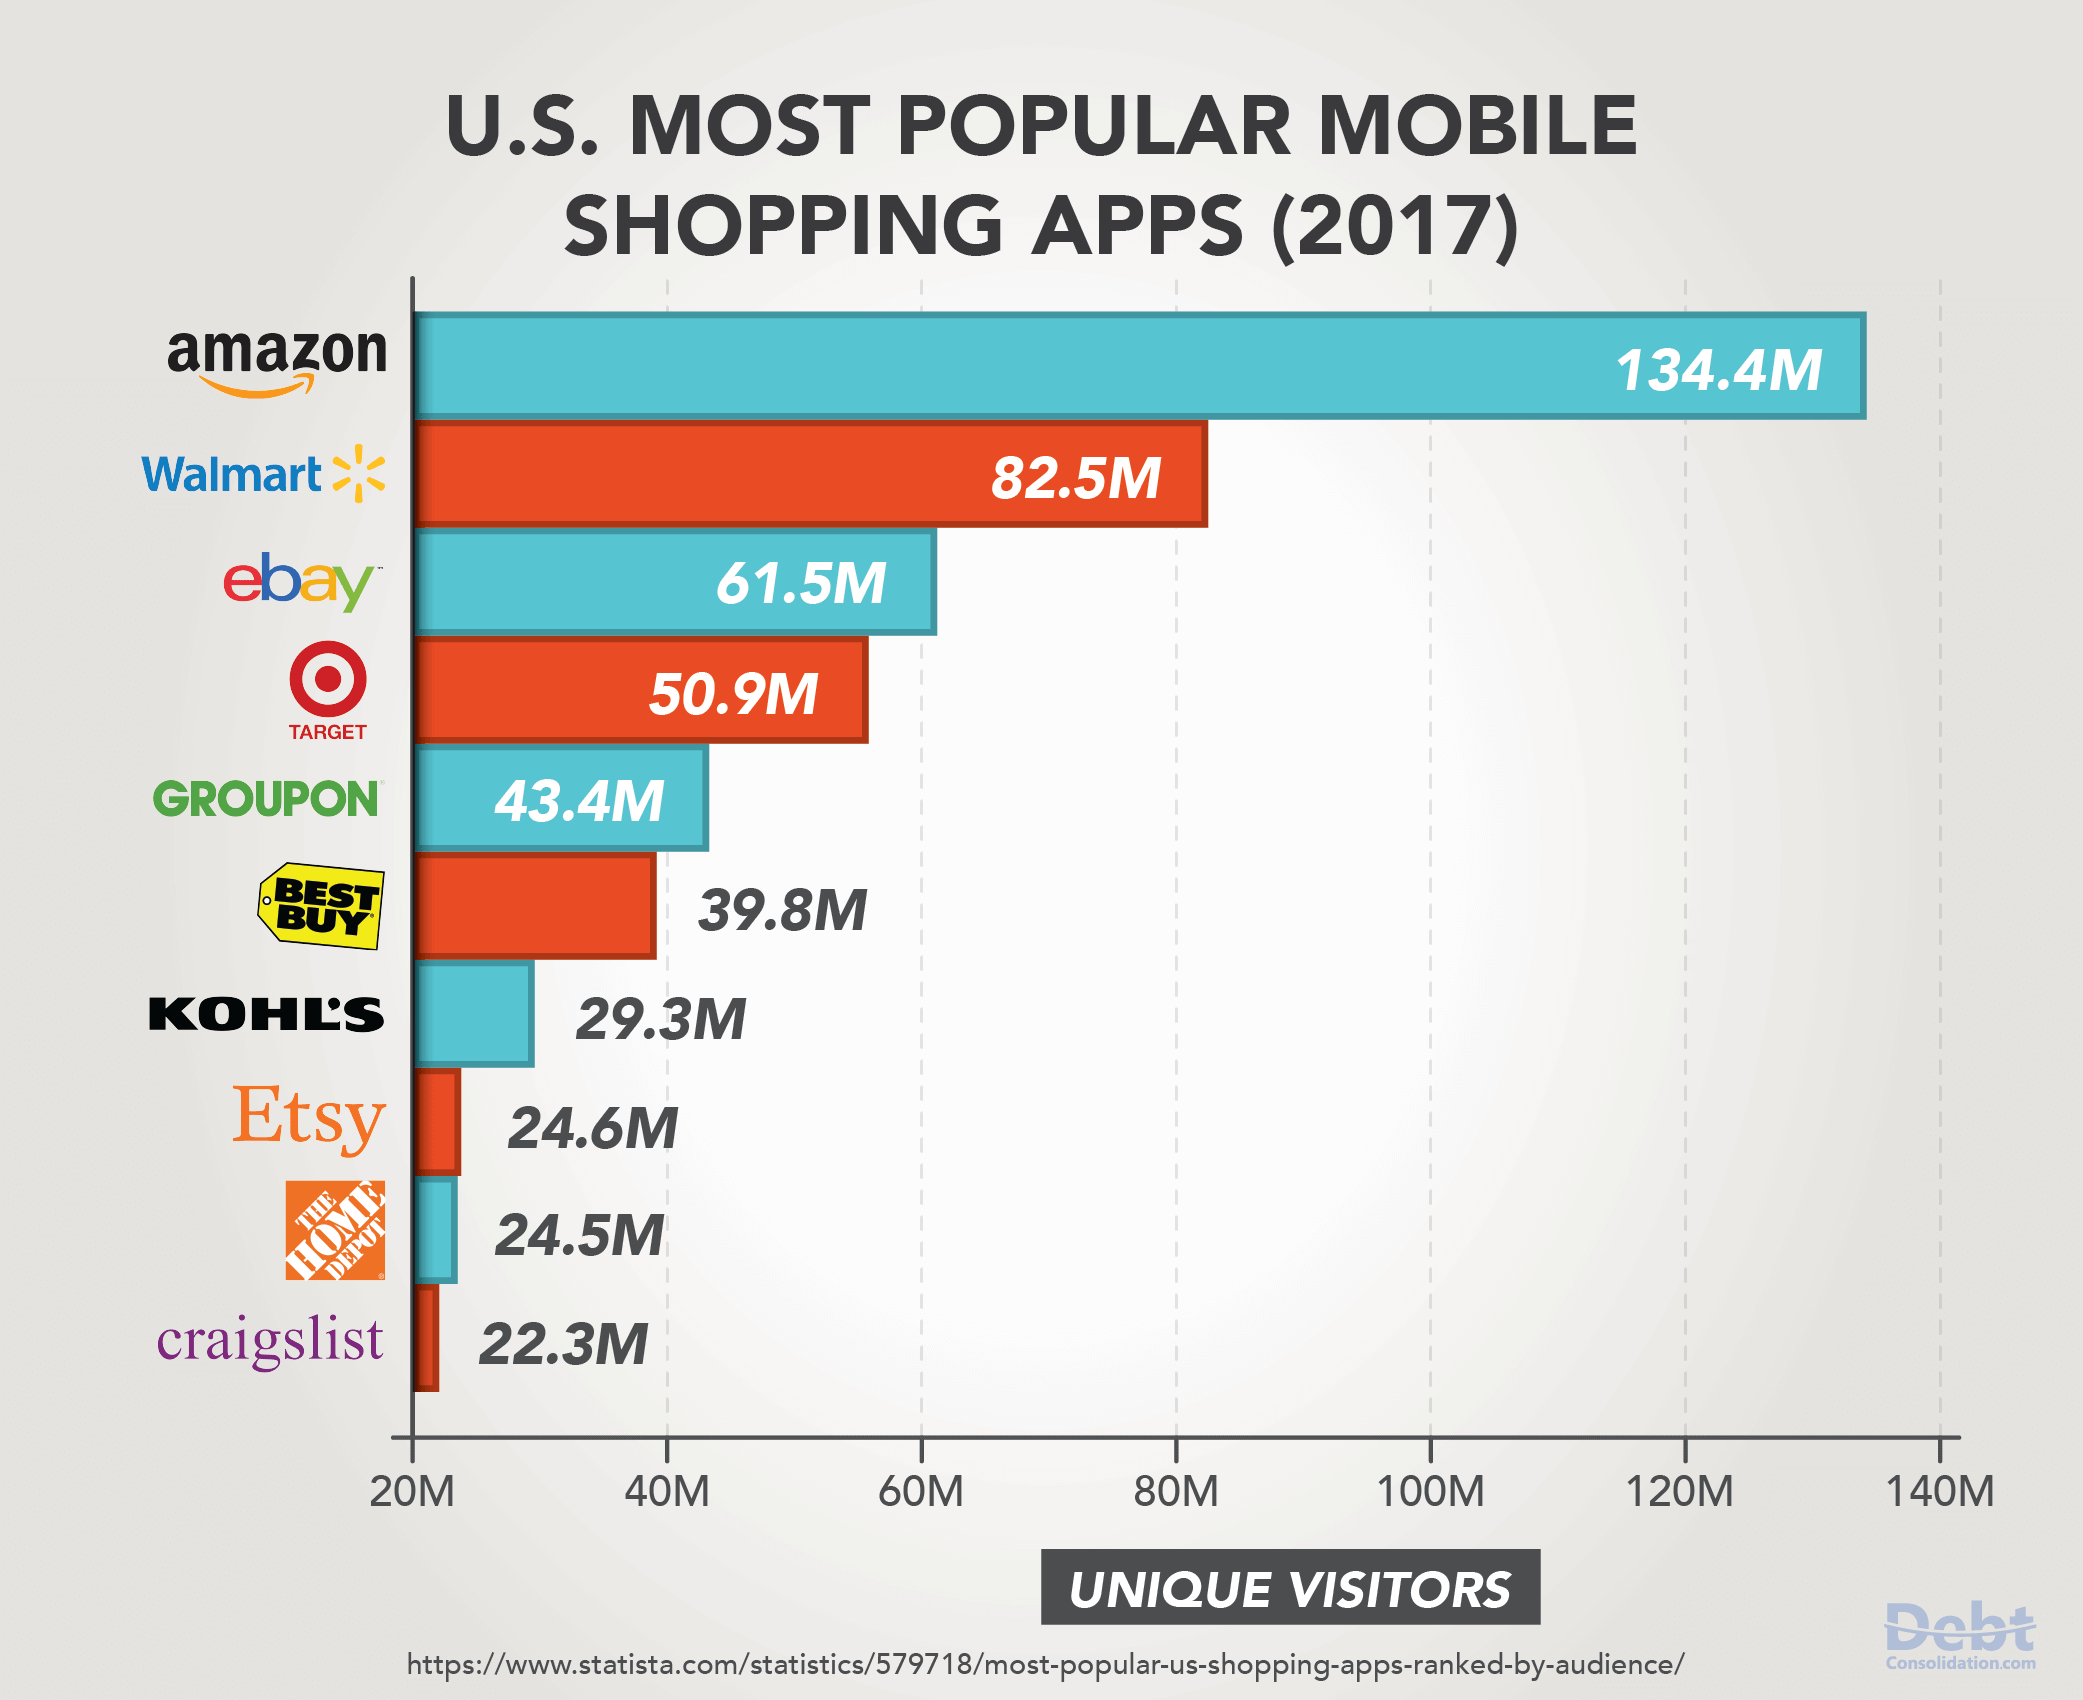 U.S. Most Popular Mobile Shopping Apps in 2017